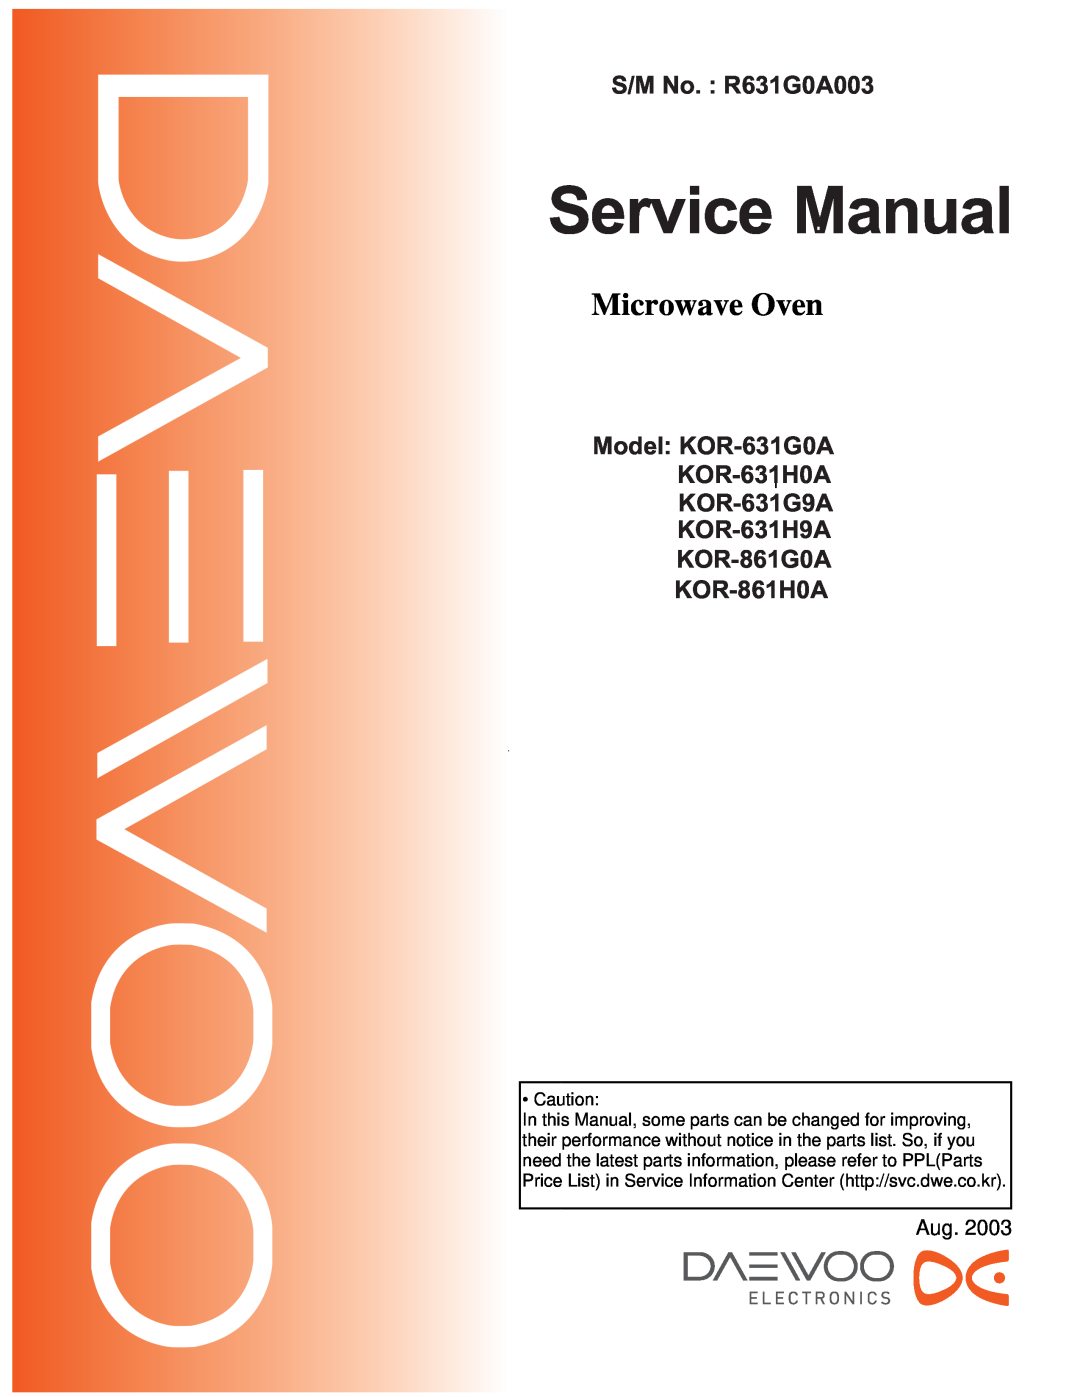 Daewoo KOR-861H0A, KOR-631G0A, KOR-631G9A, KOR-861G0A service manual Service Manual, Microwave Oven, S/M No. R631G0A003 